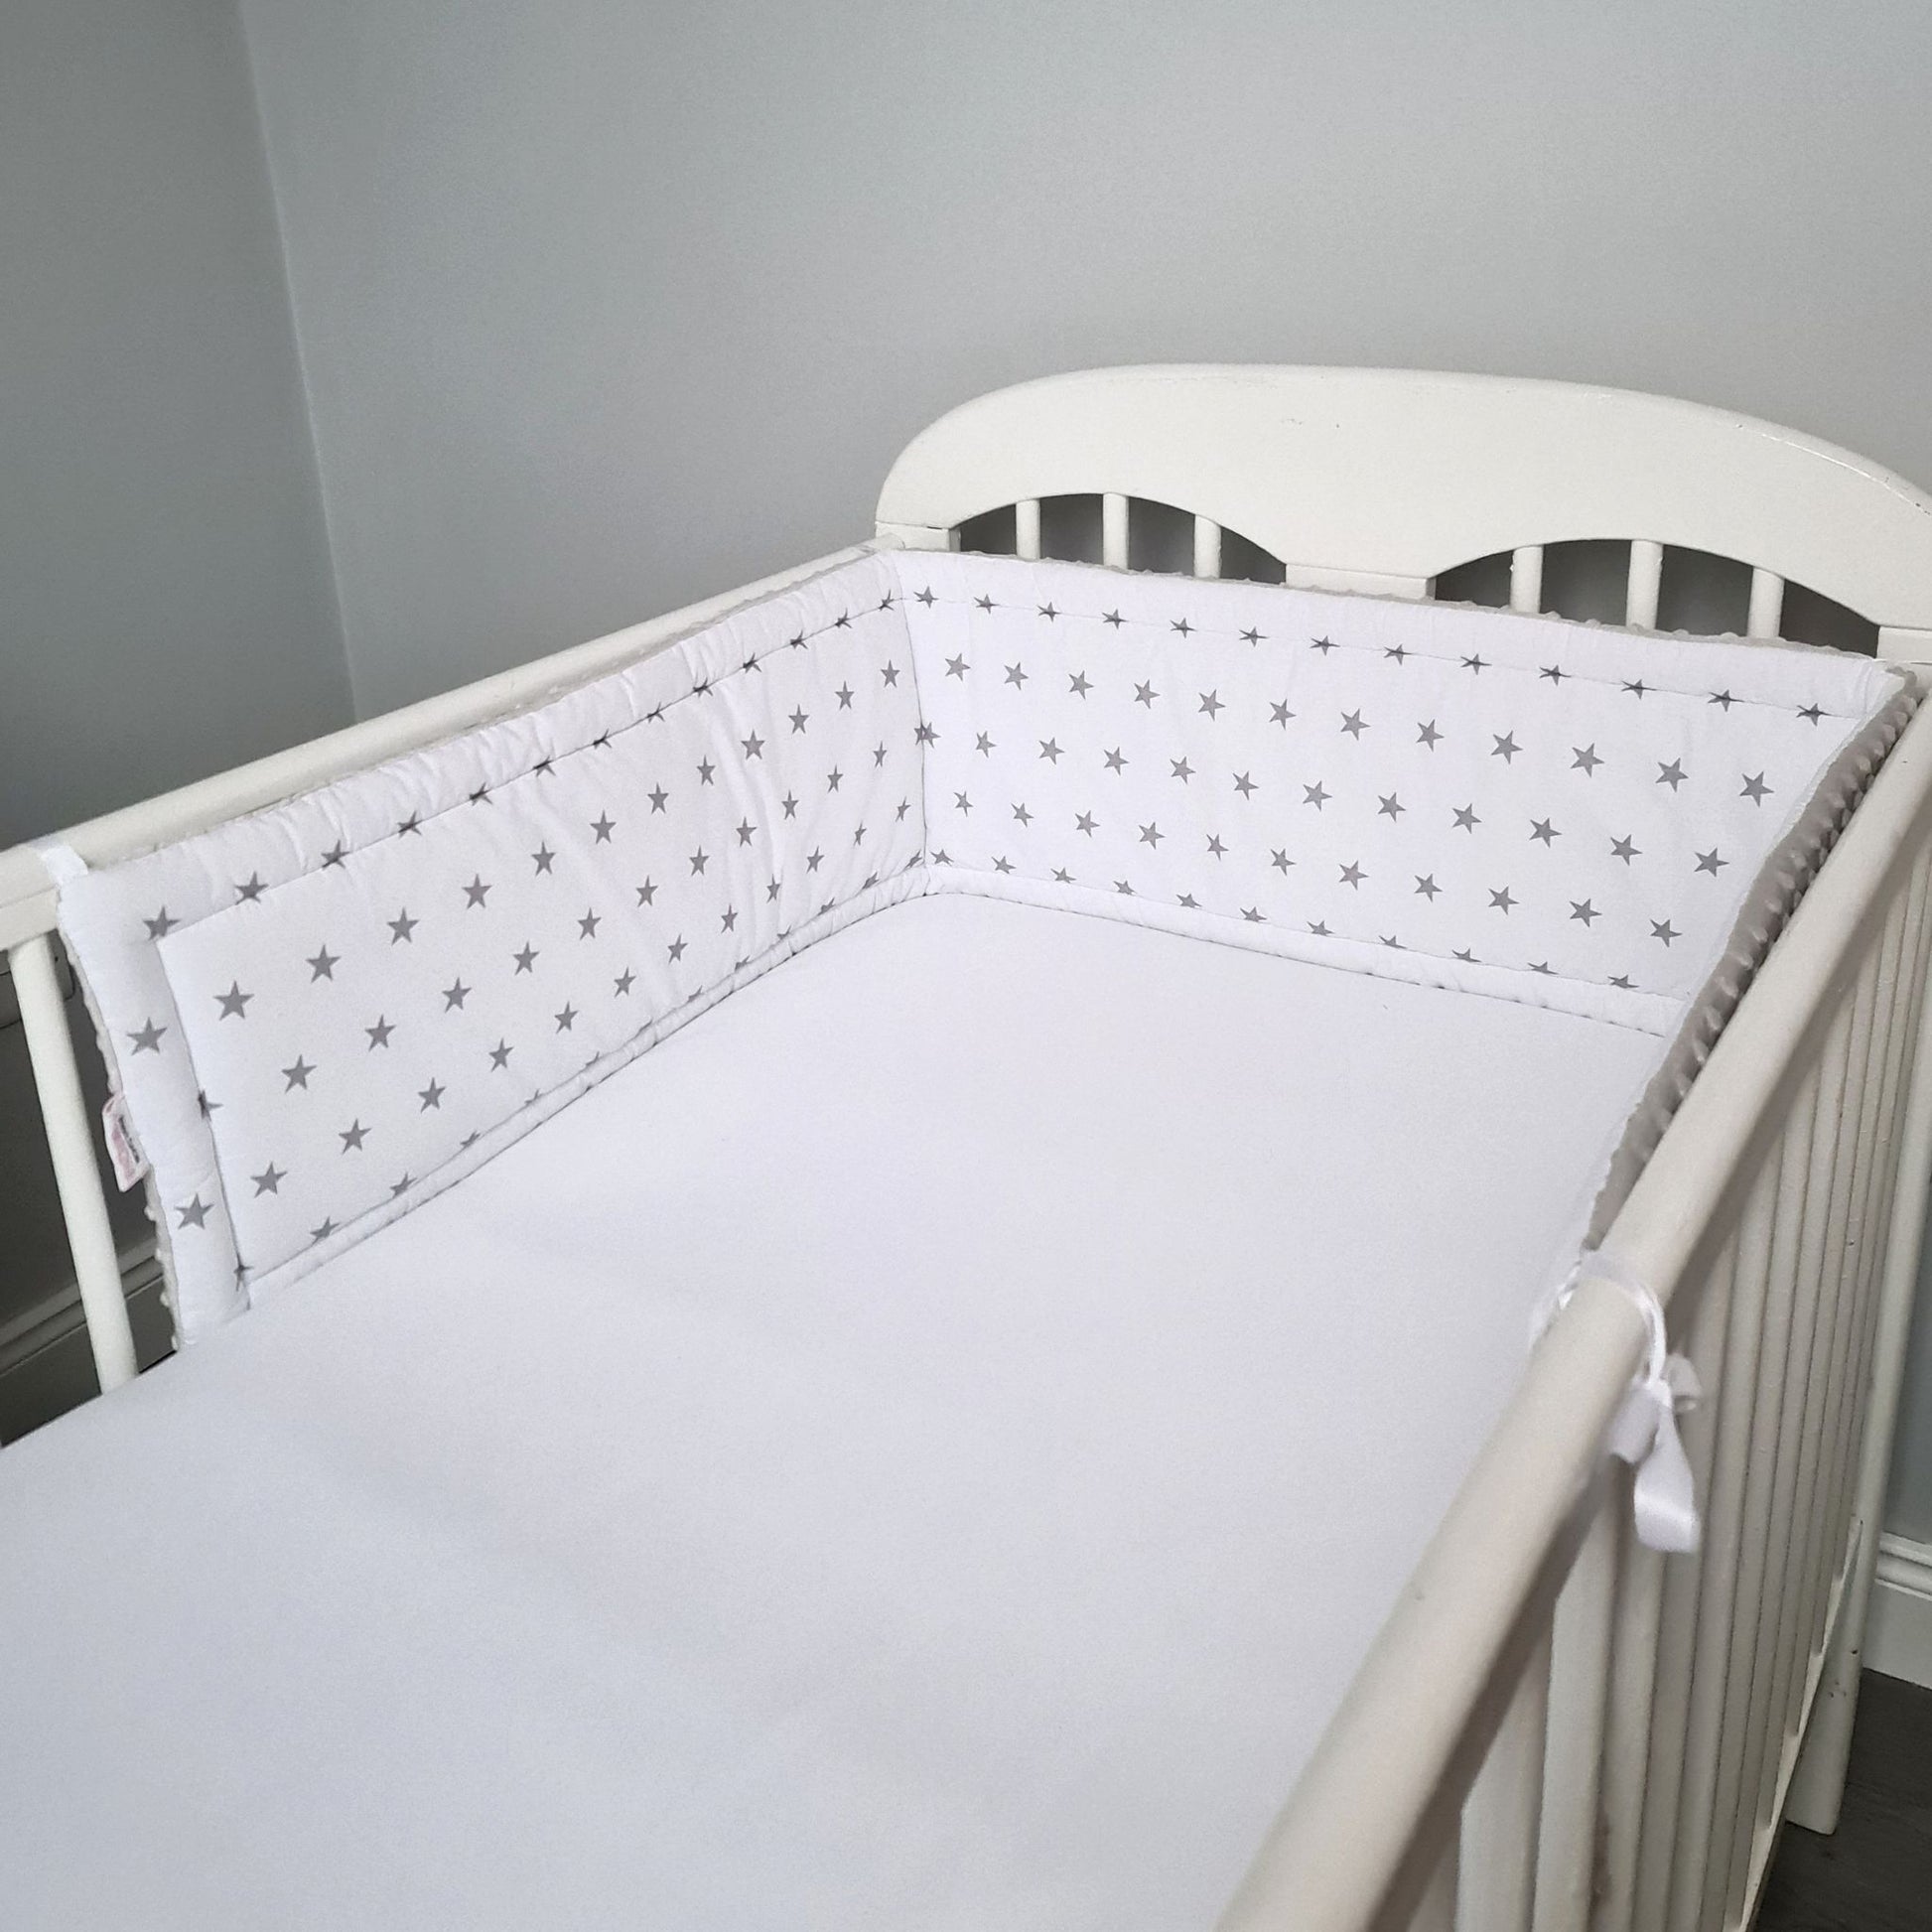 cot bed bumper protector liner for crib